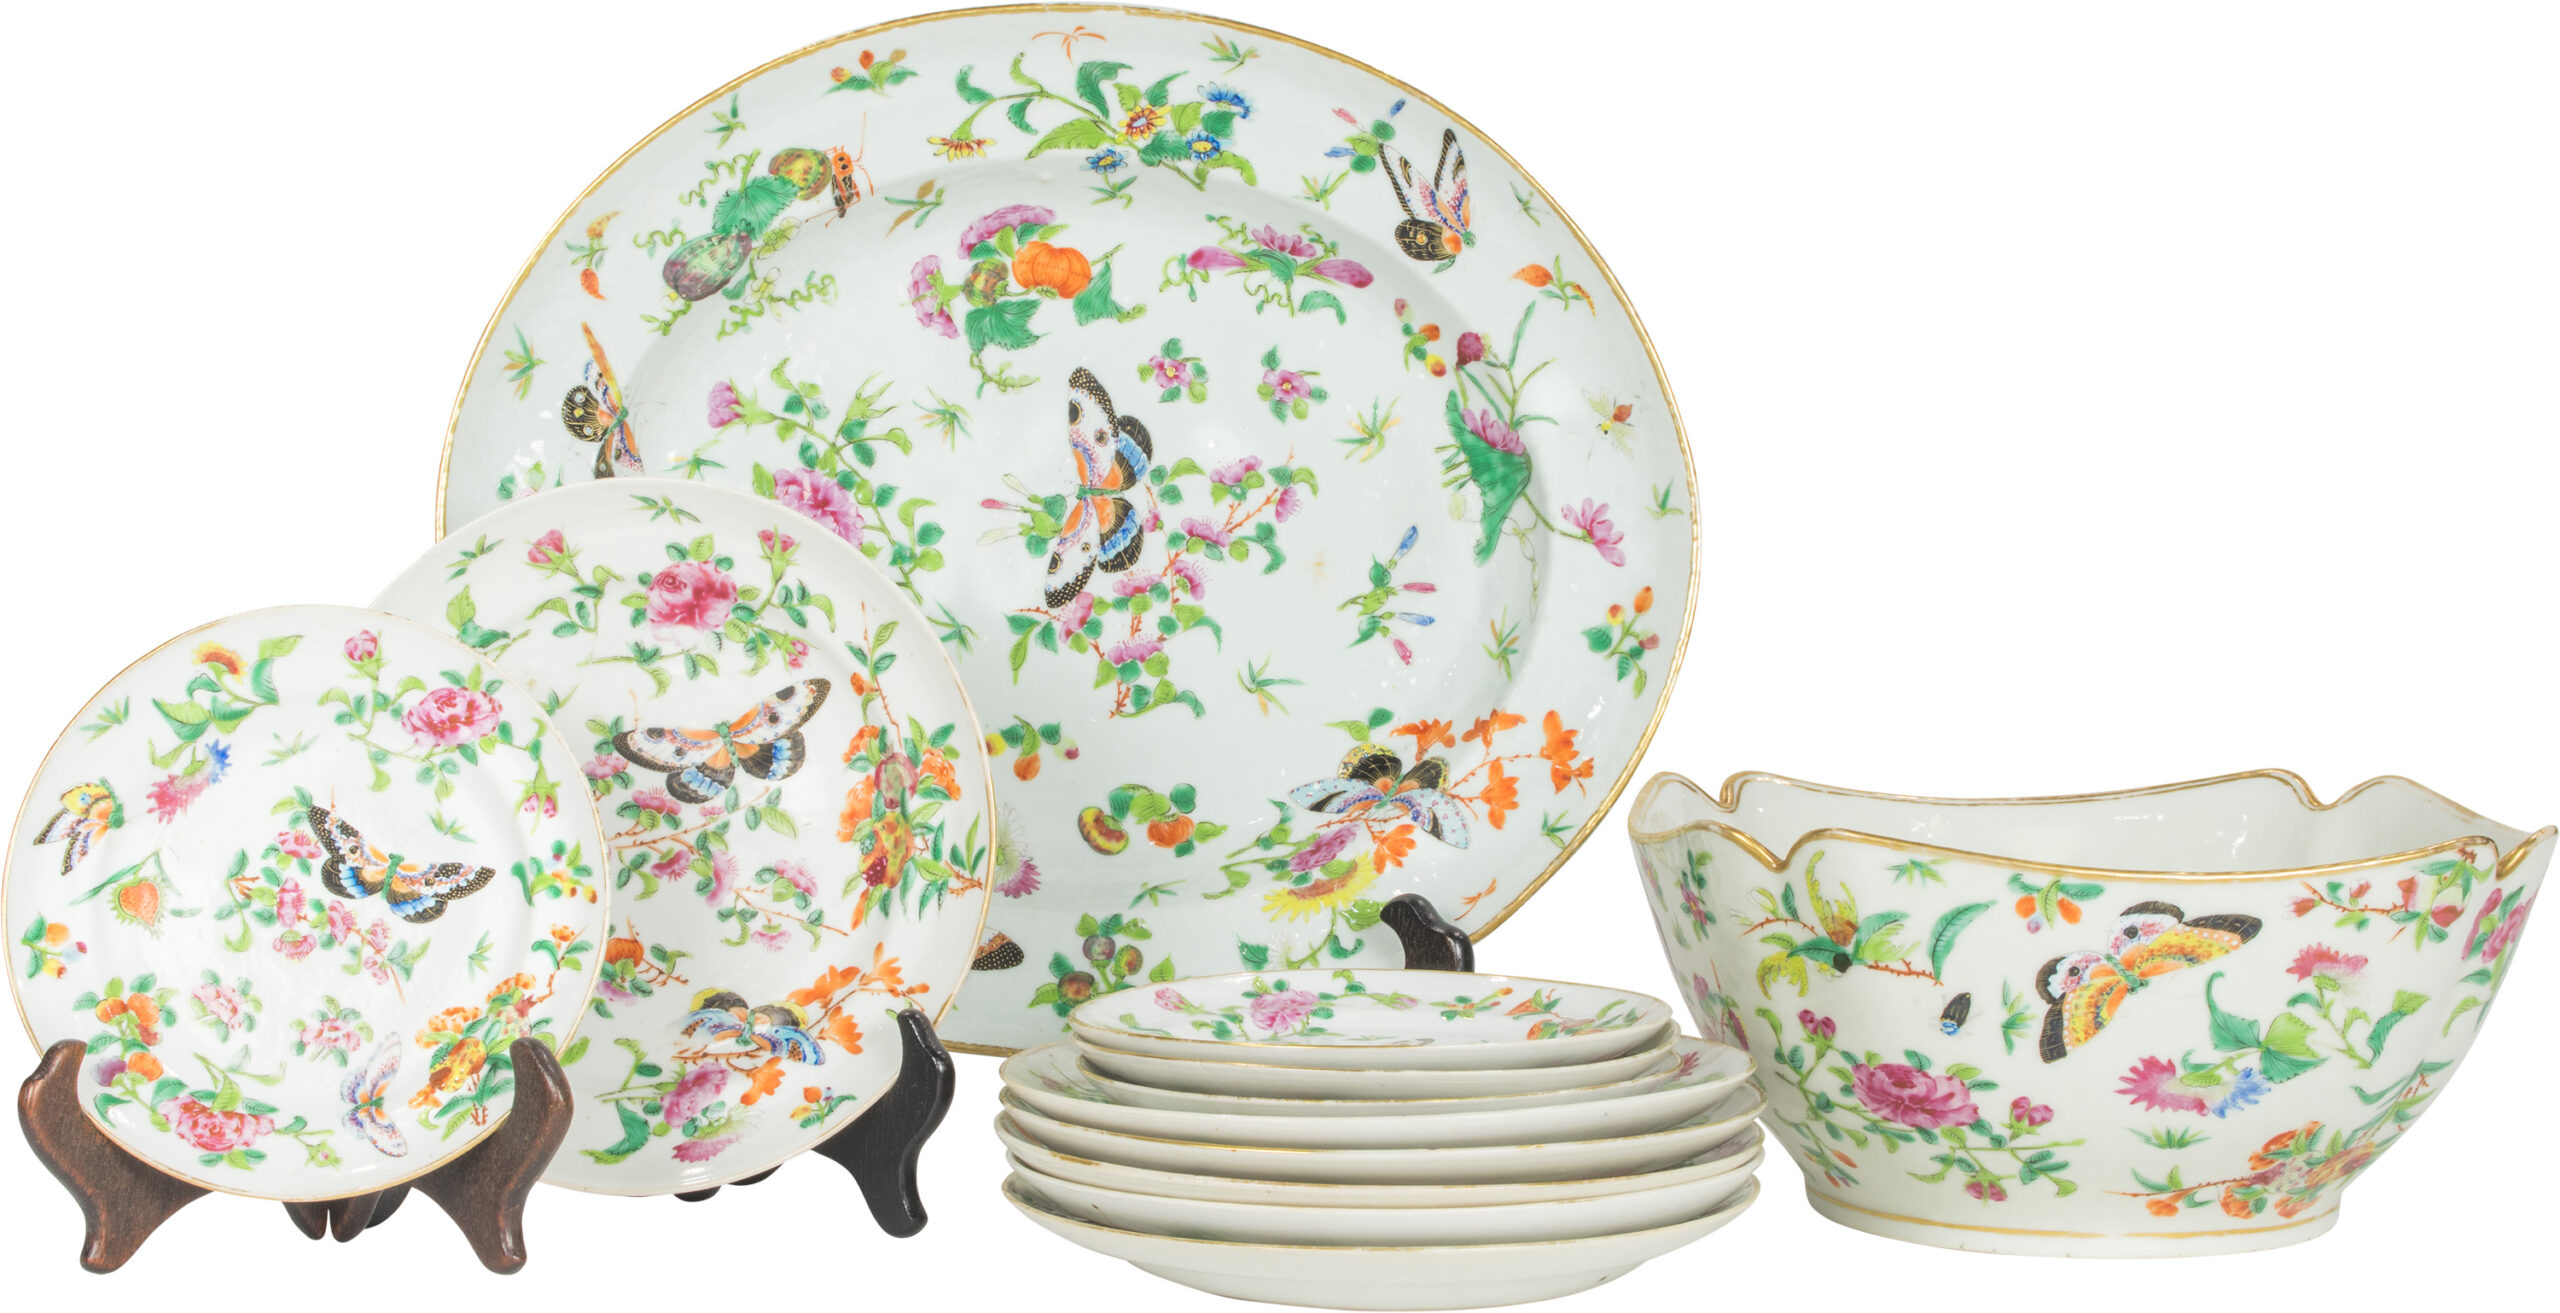 A suite of Chinese Export famille rose porcelain with butterflies and flowers.